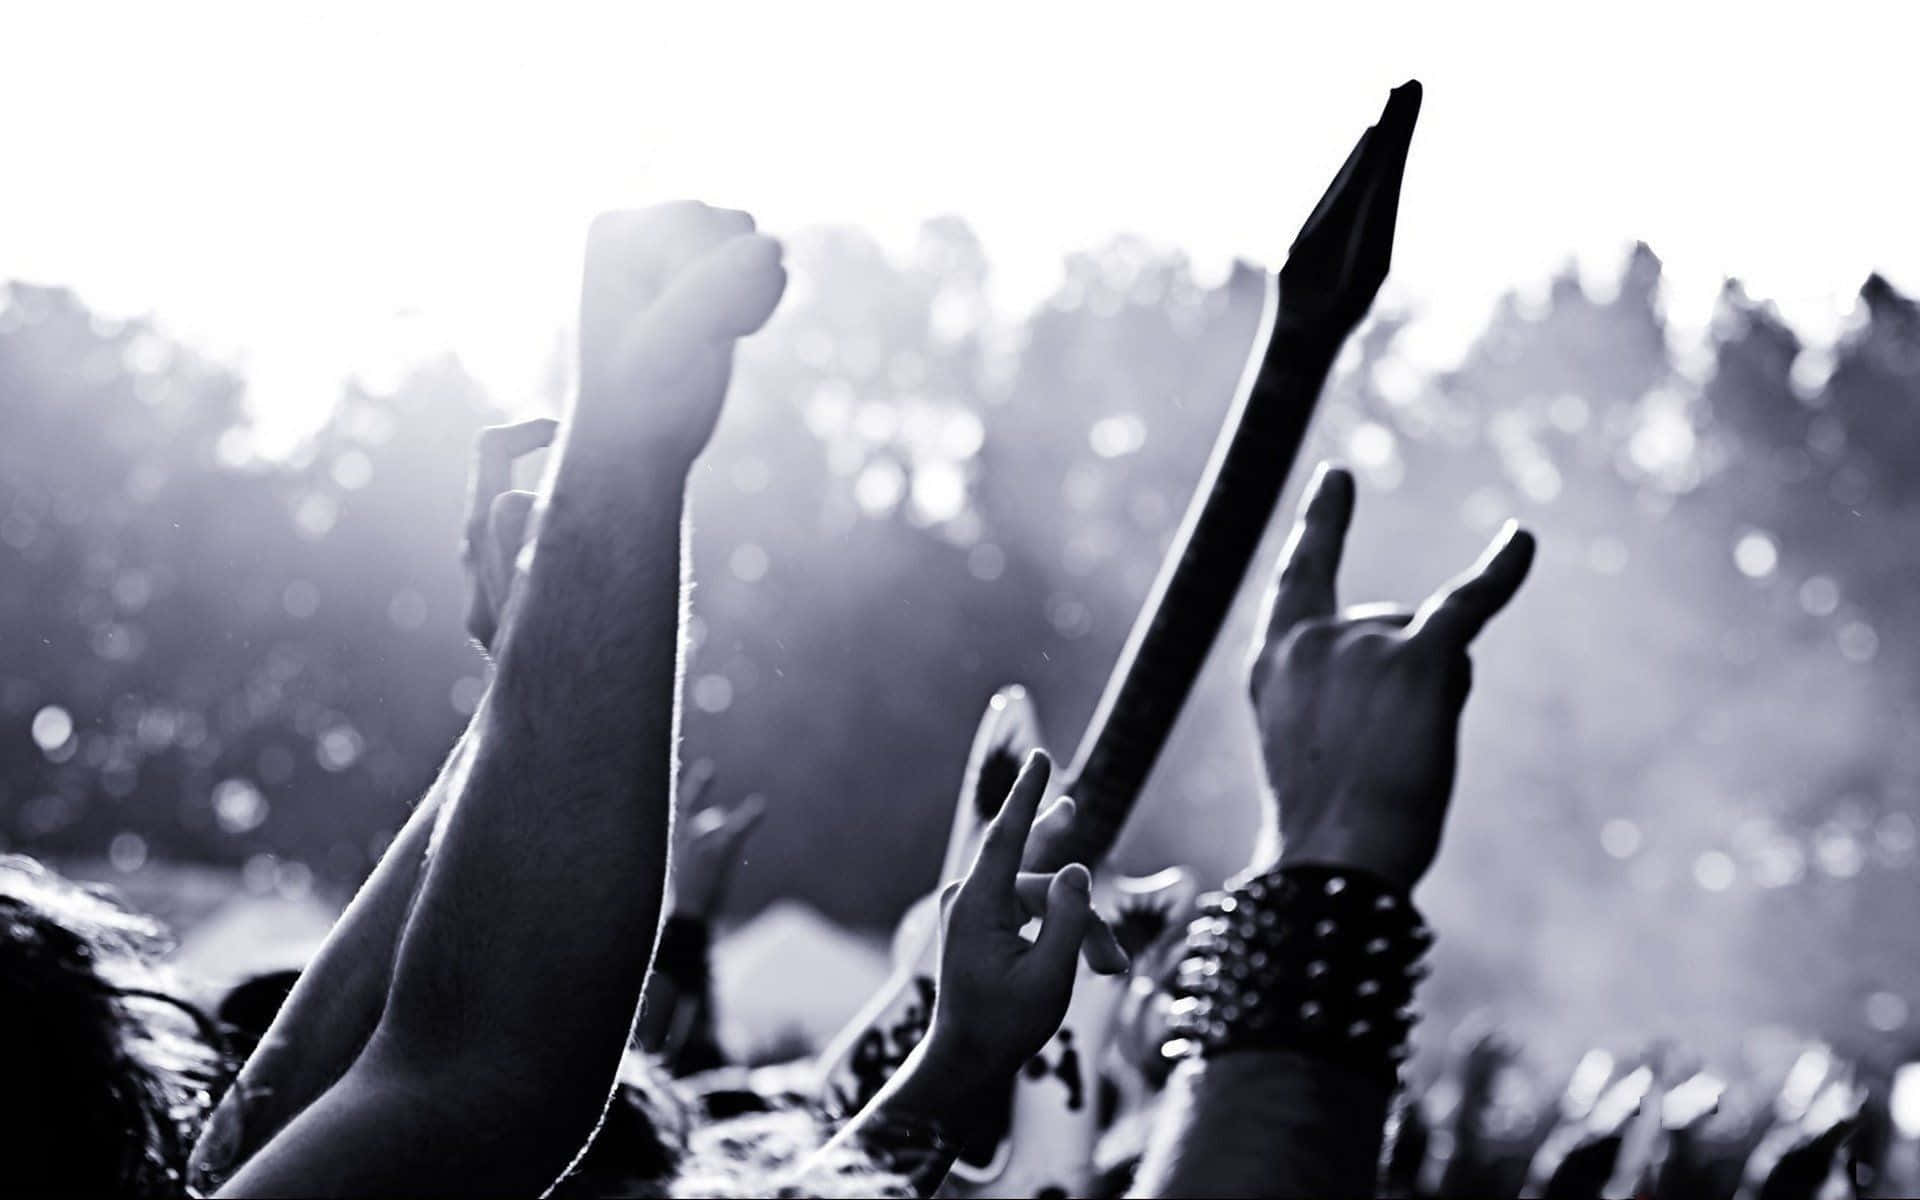 Metal Music Enthusiasts Unite To Create A Loud, Powerful Sound